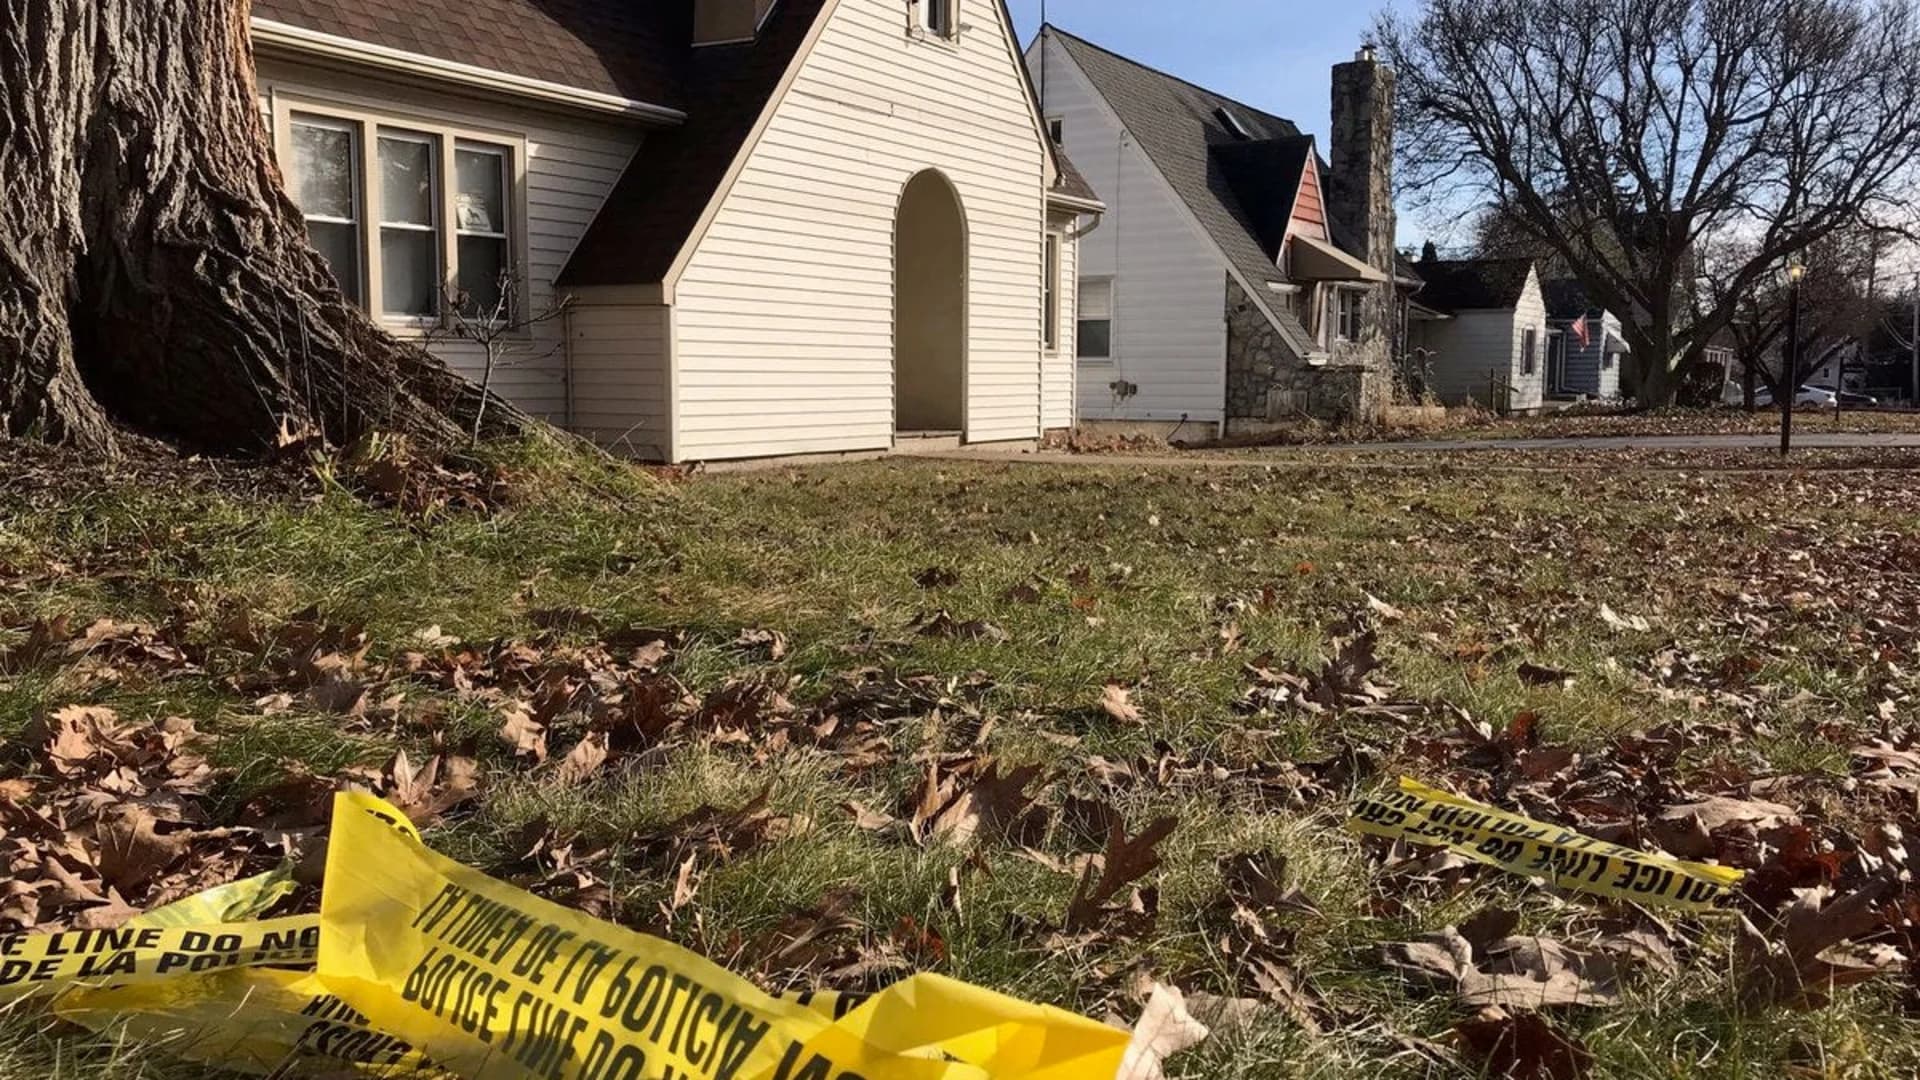 Police: Couple found dead after apparent murder-suicide in Middletown